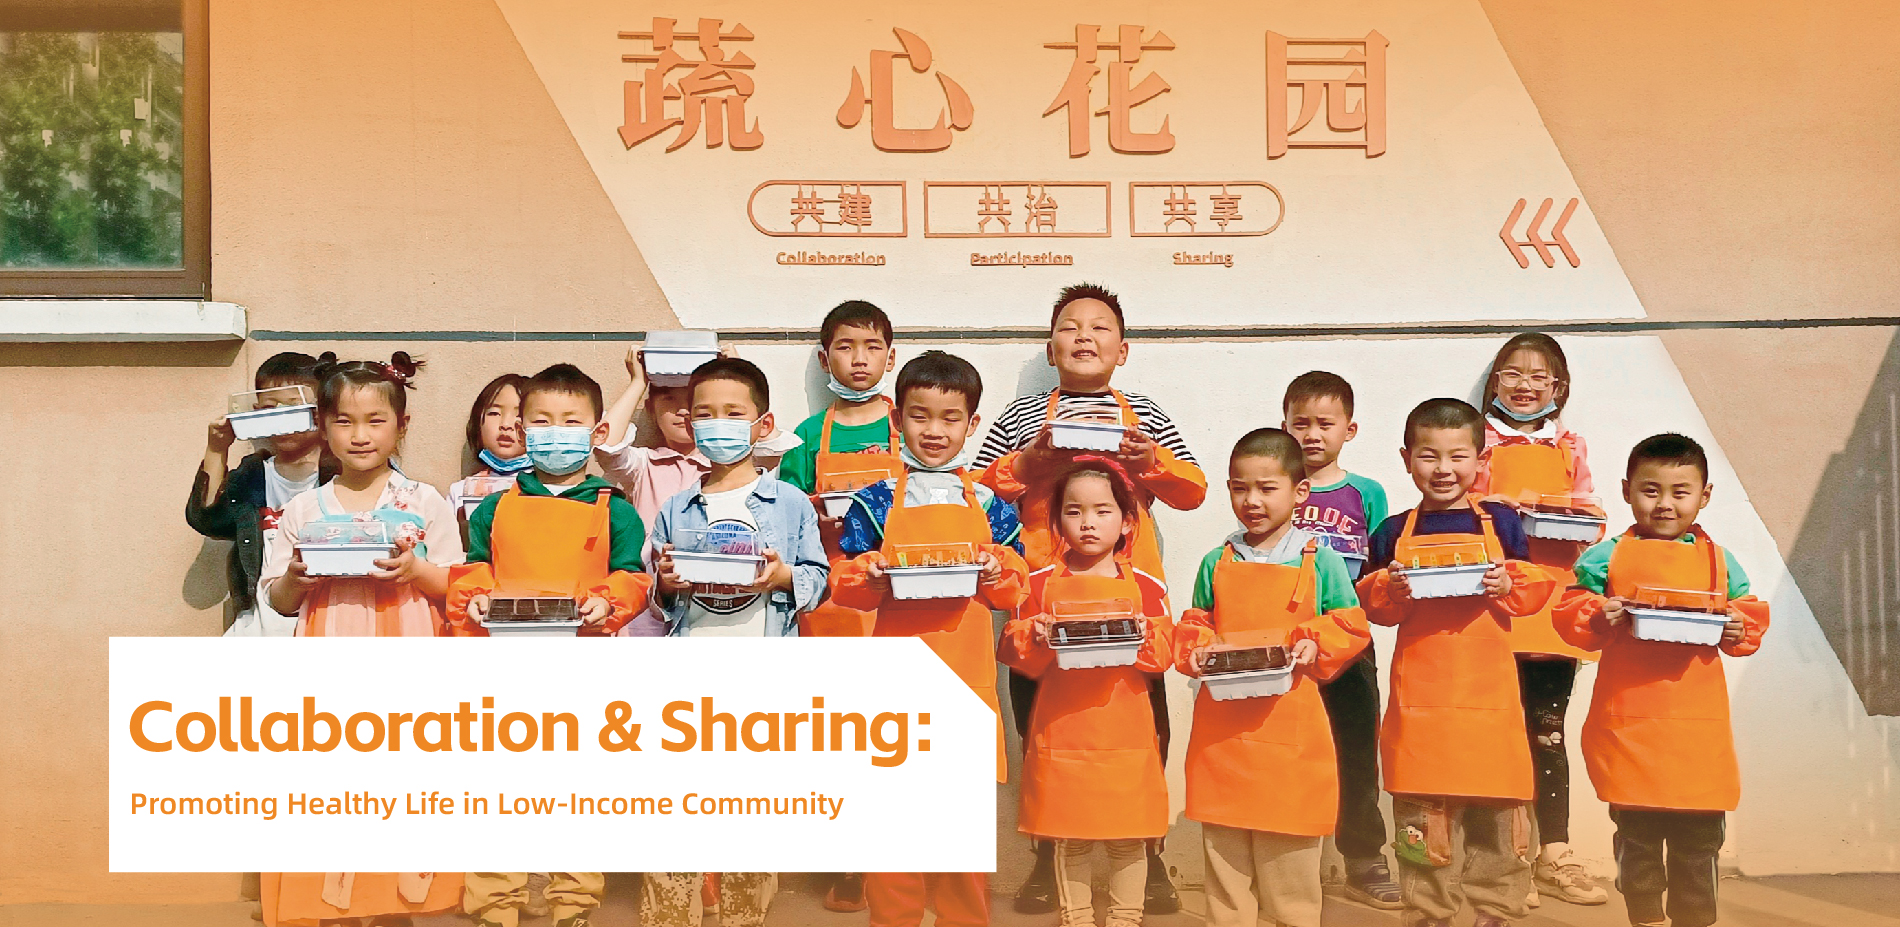 Collaboration & Sharing: Promoting Healthy Life in Low-Income Community